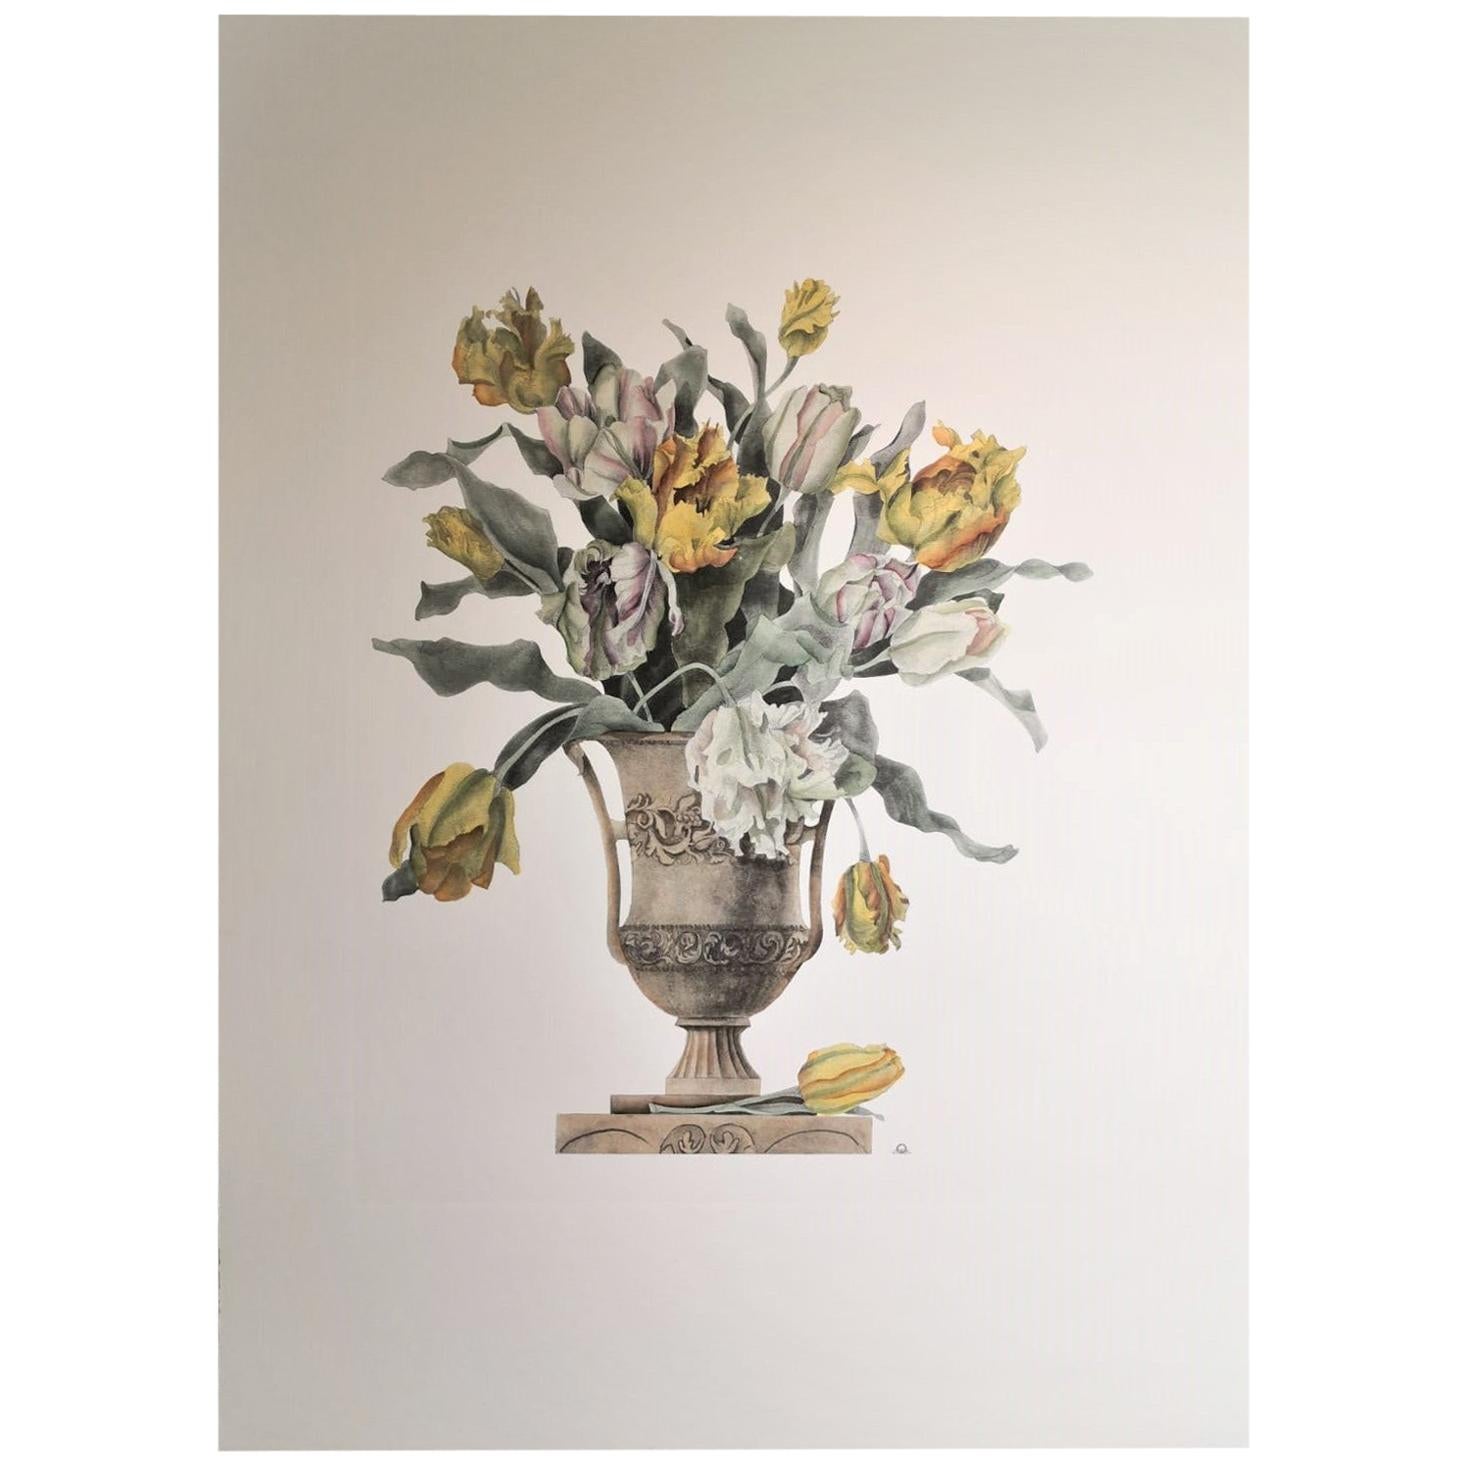 Italian Contemporary Hand Painted Yellow and White Tulips Vase Big Print